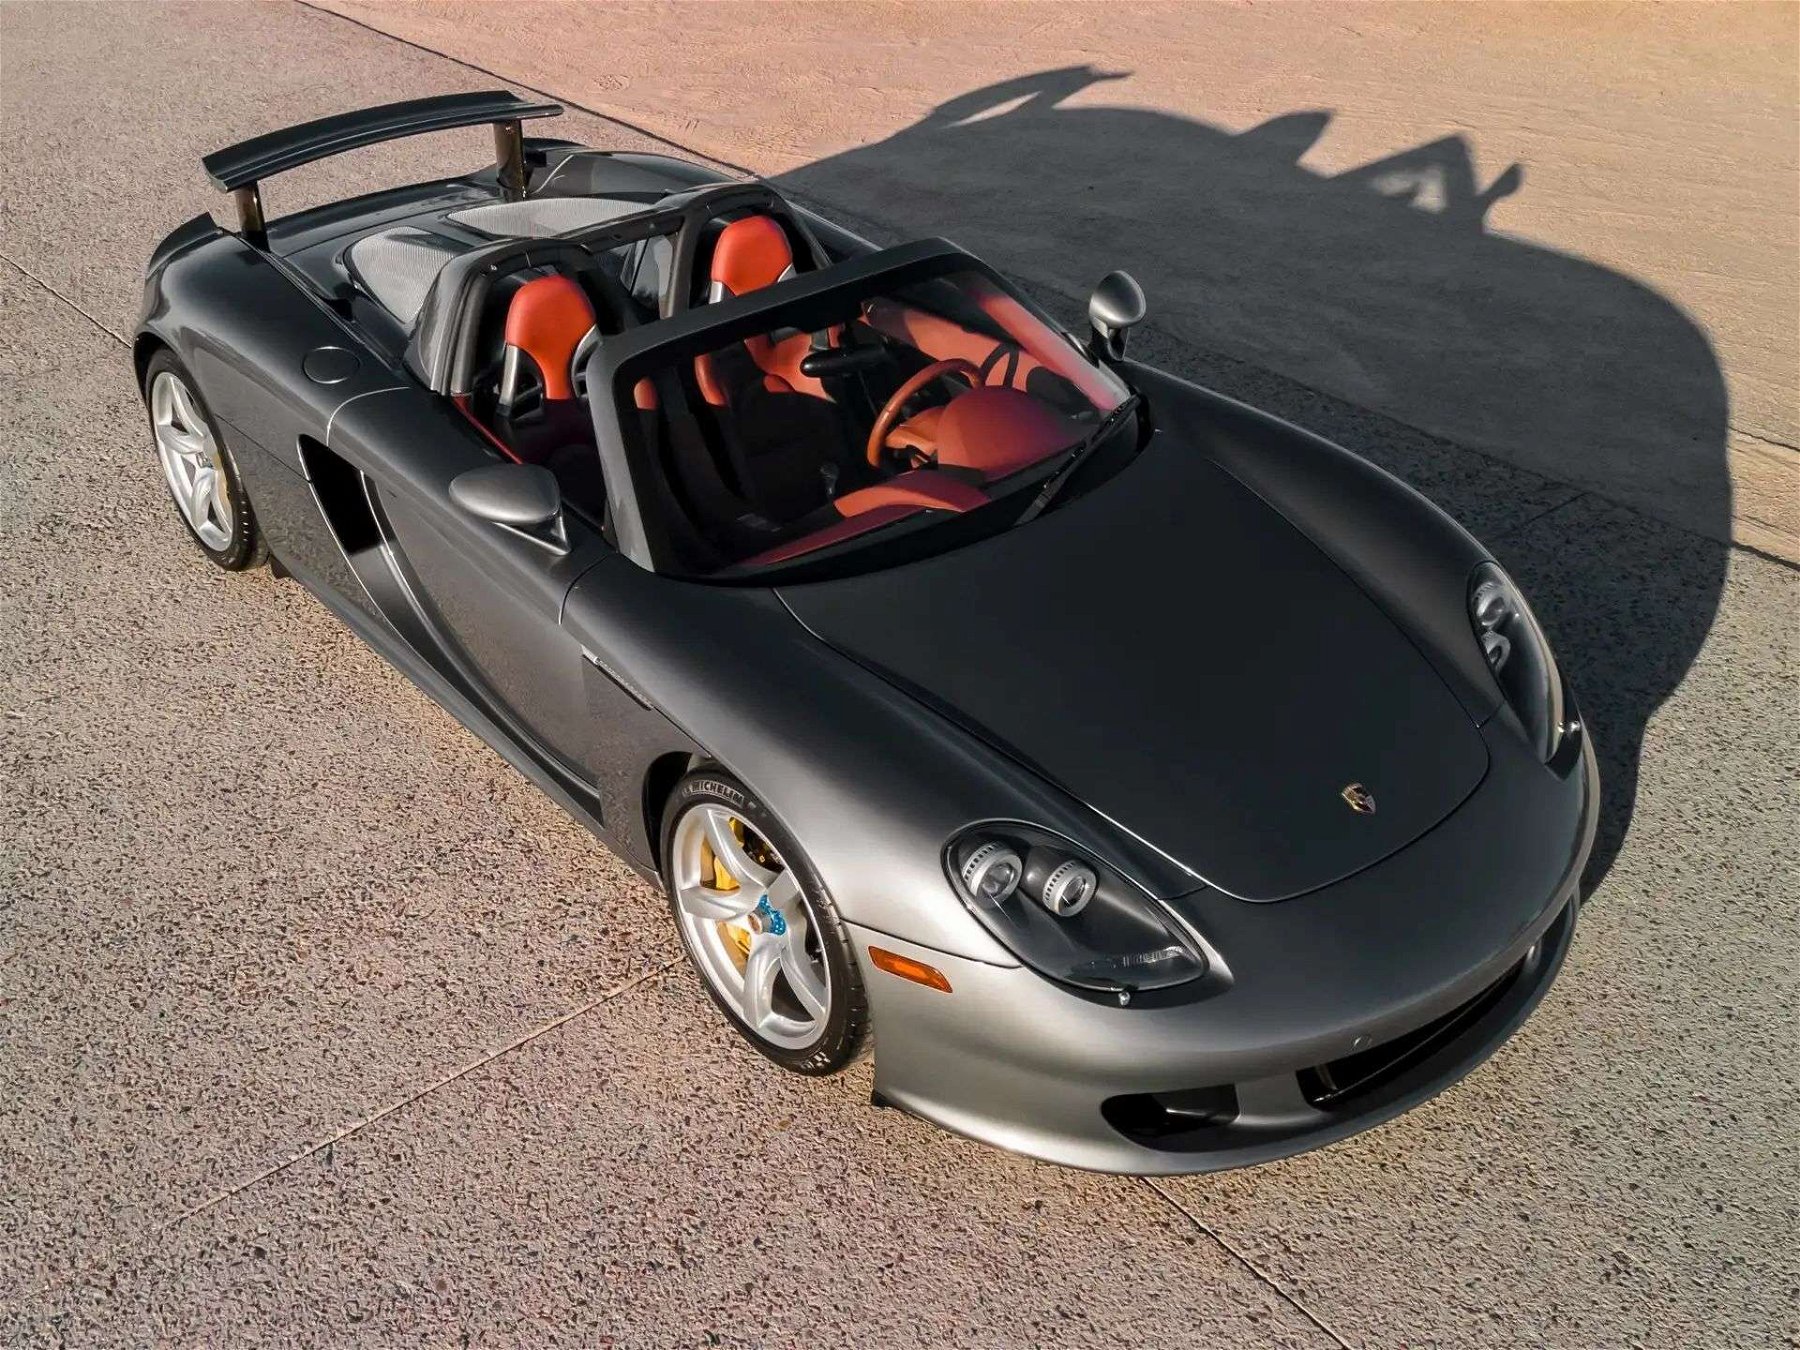 2004 Porsche Carrera GT Is Like New With 27 Miles, And It's For Sale